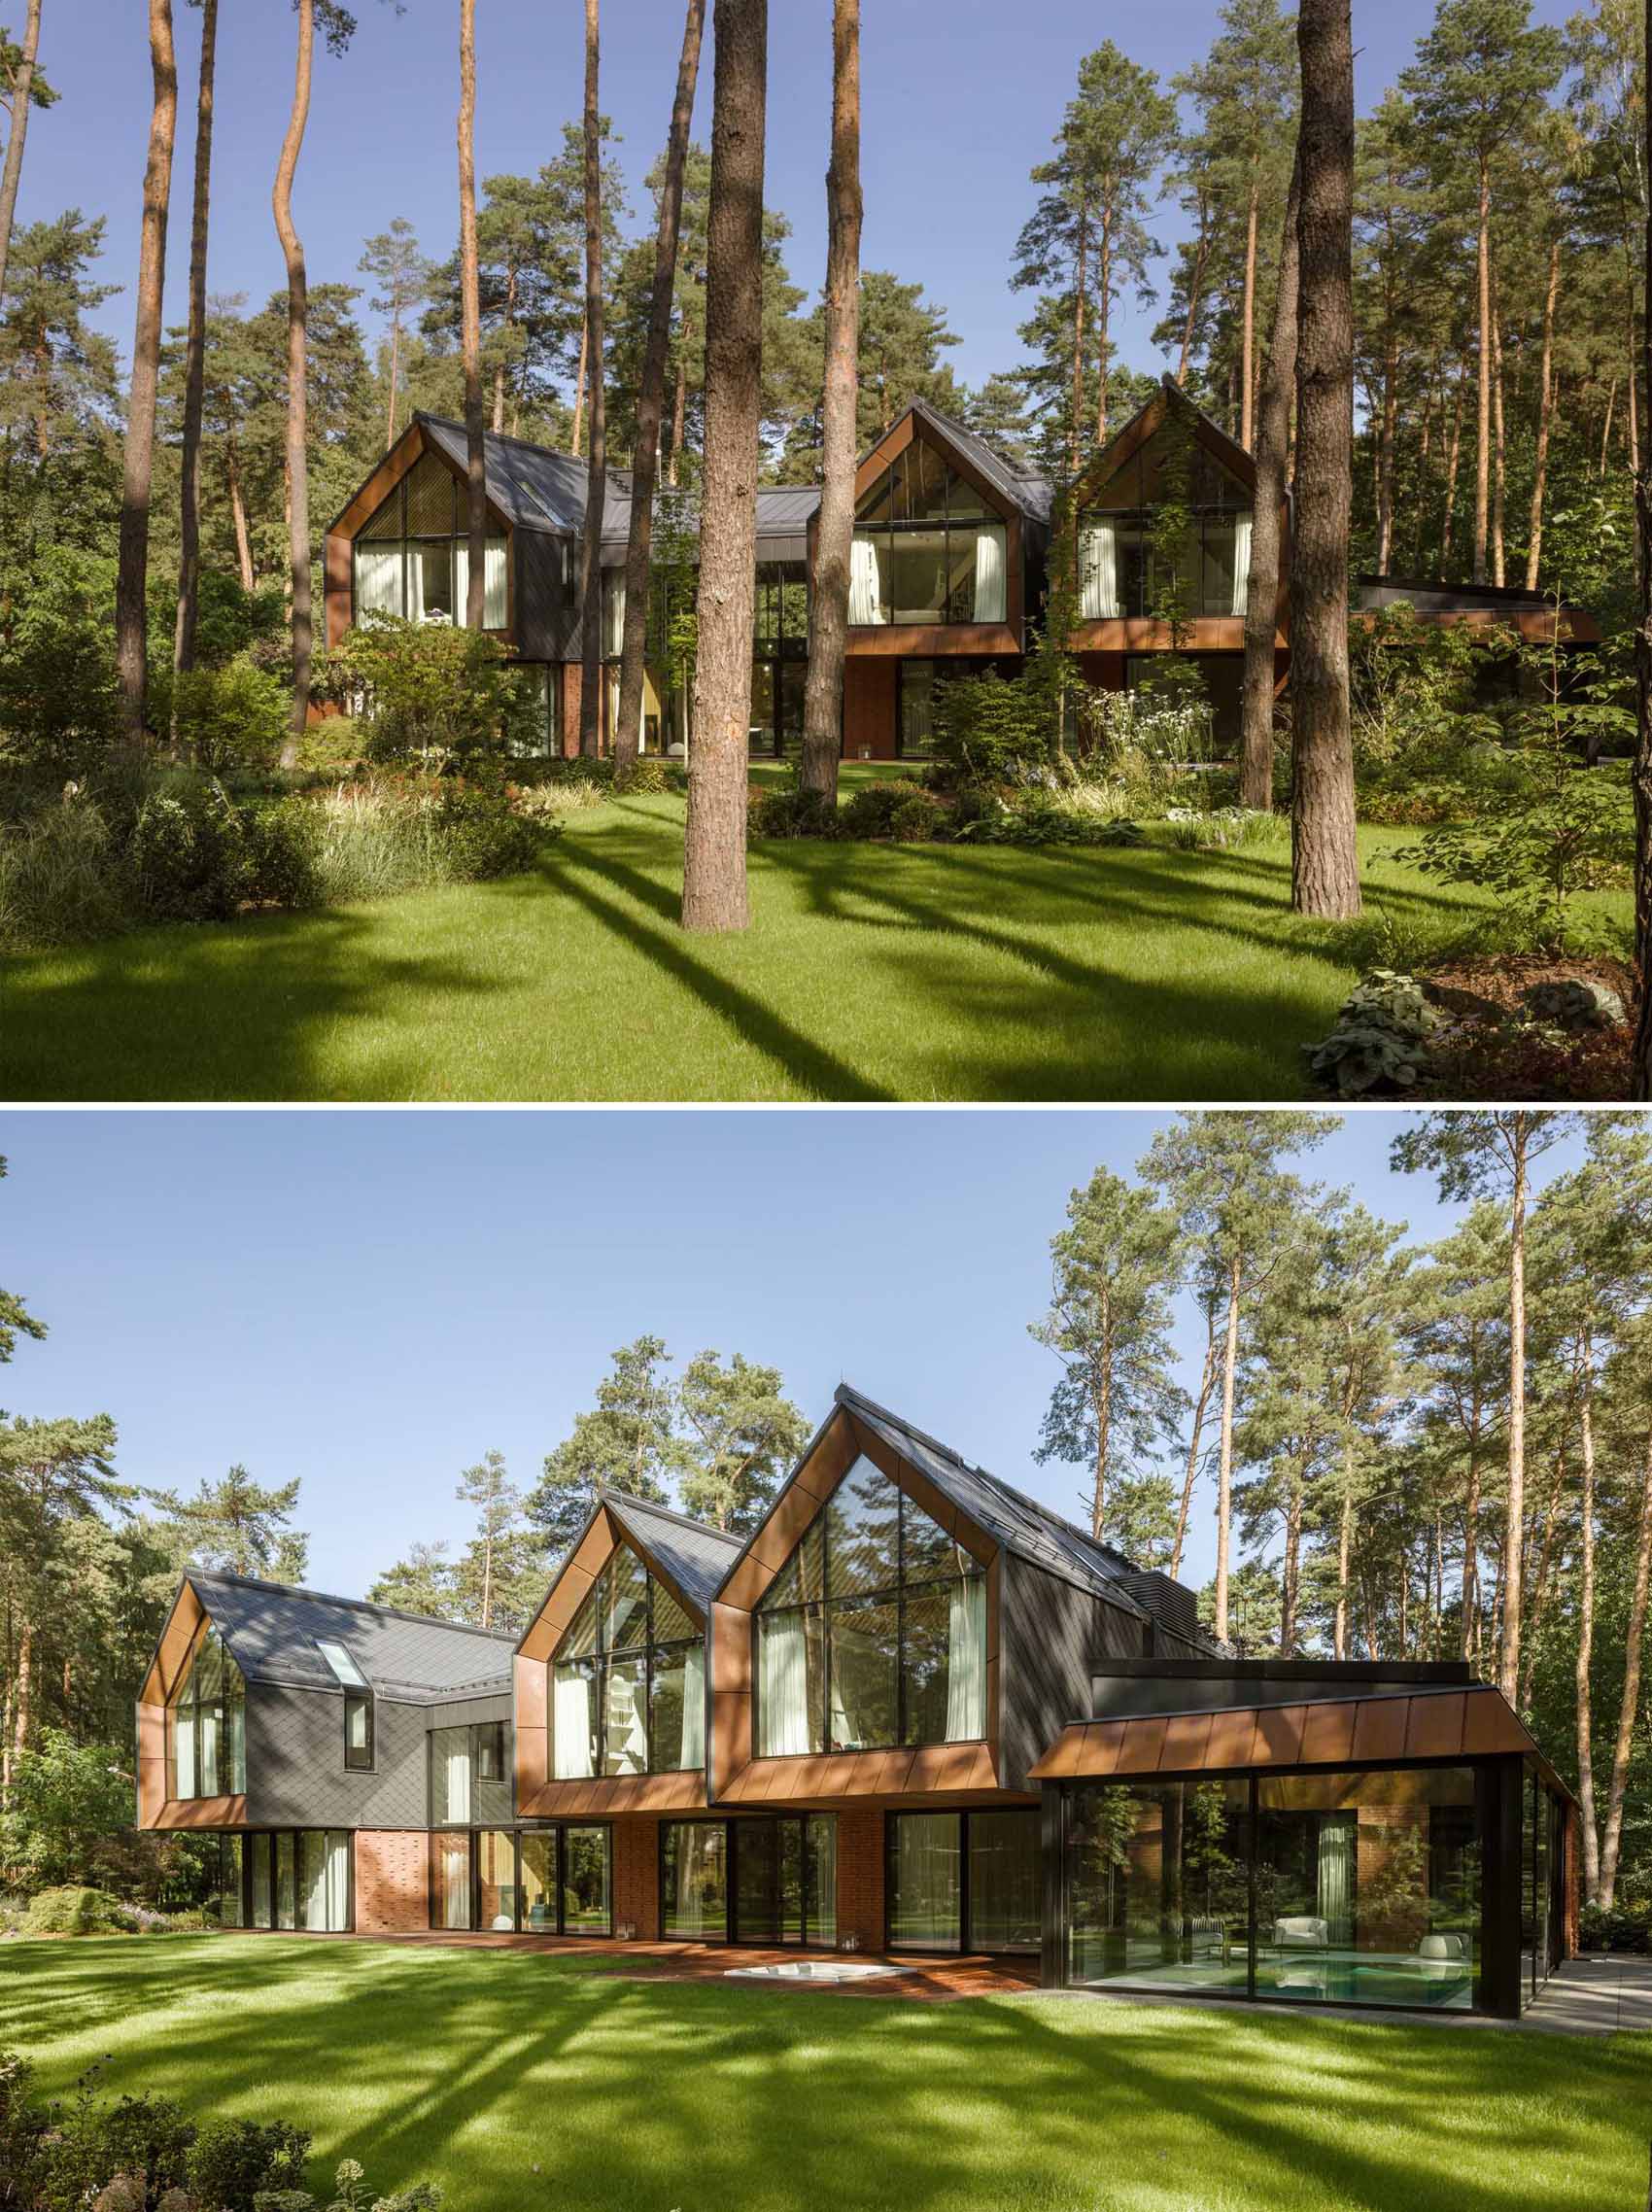 A modern home in the forest, features gabled forms, red brick, black-coated tiles, and an weathered steel on its exterior.